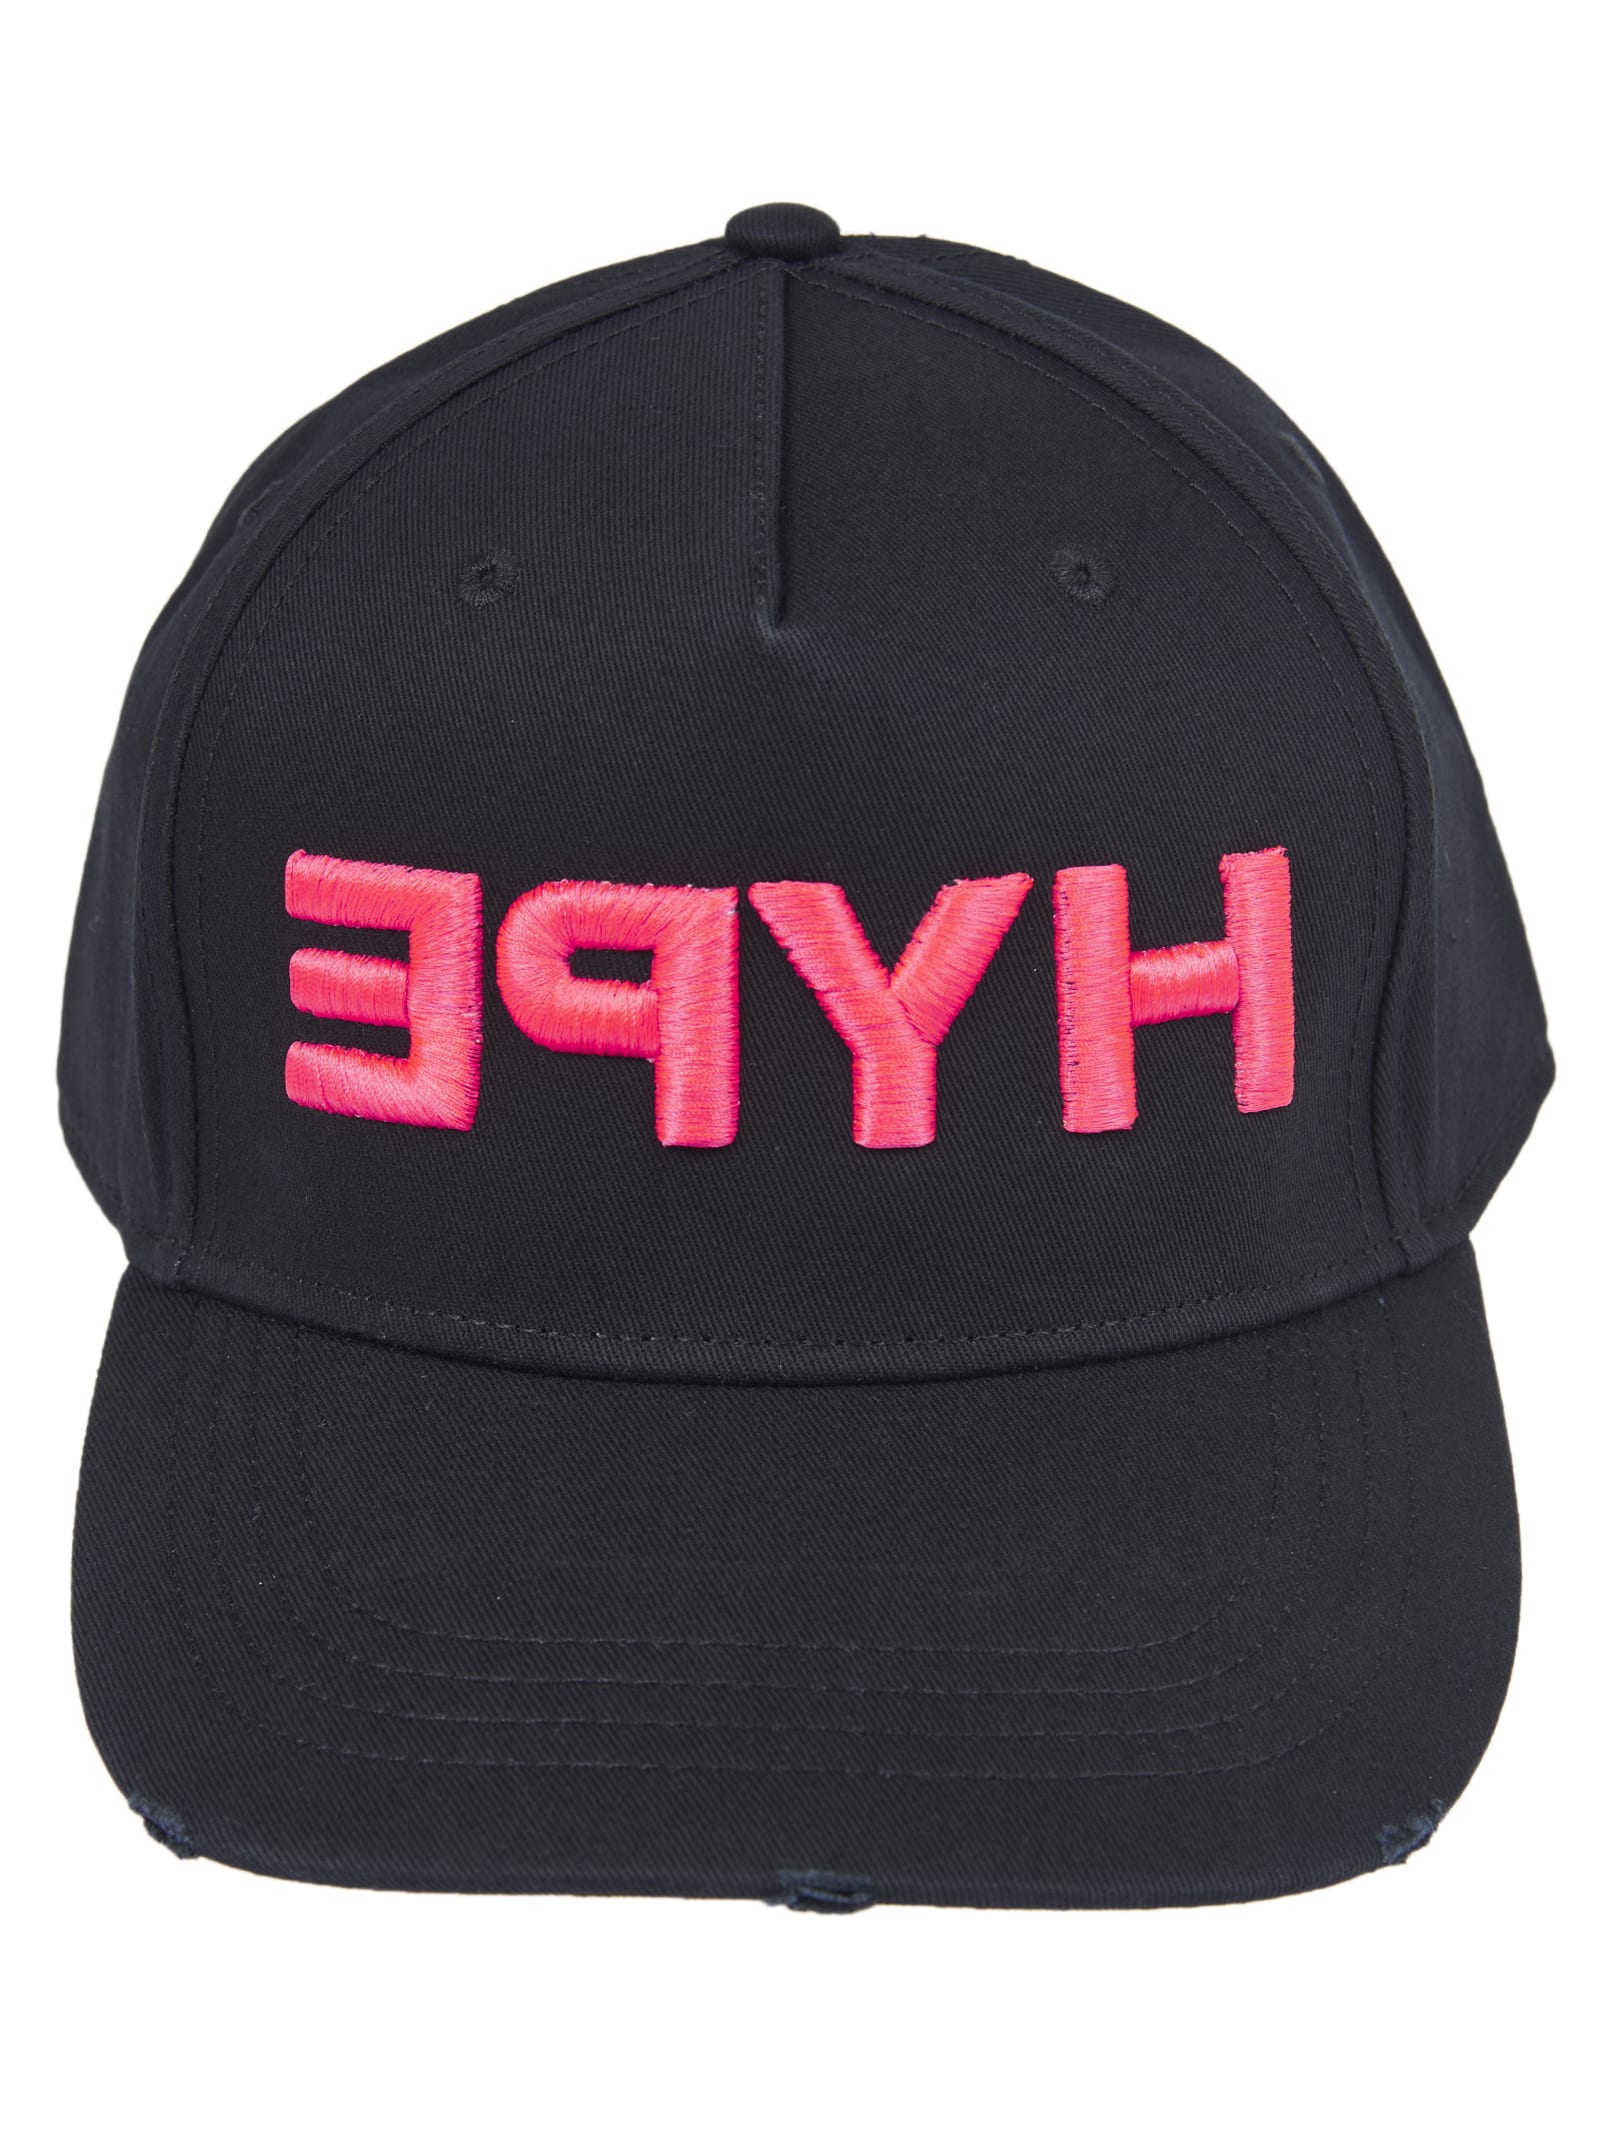 Vision of Super Black Cap With hype Embroidery